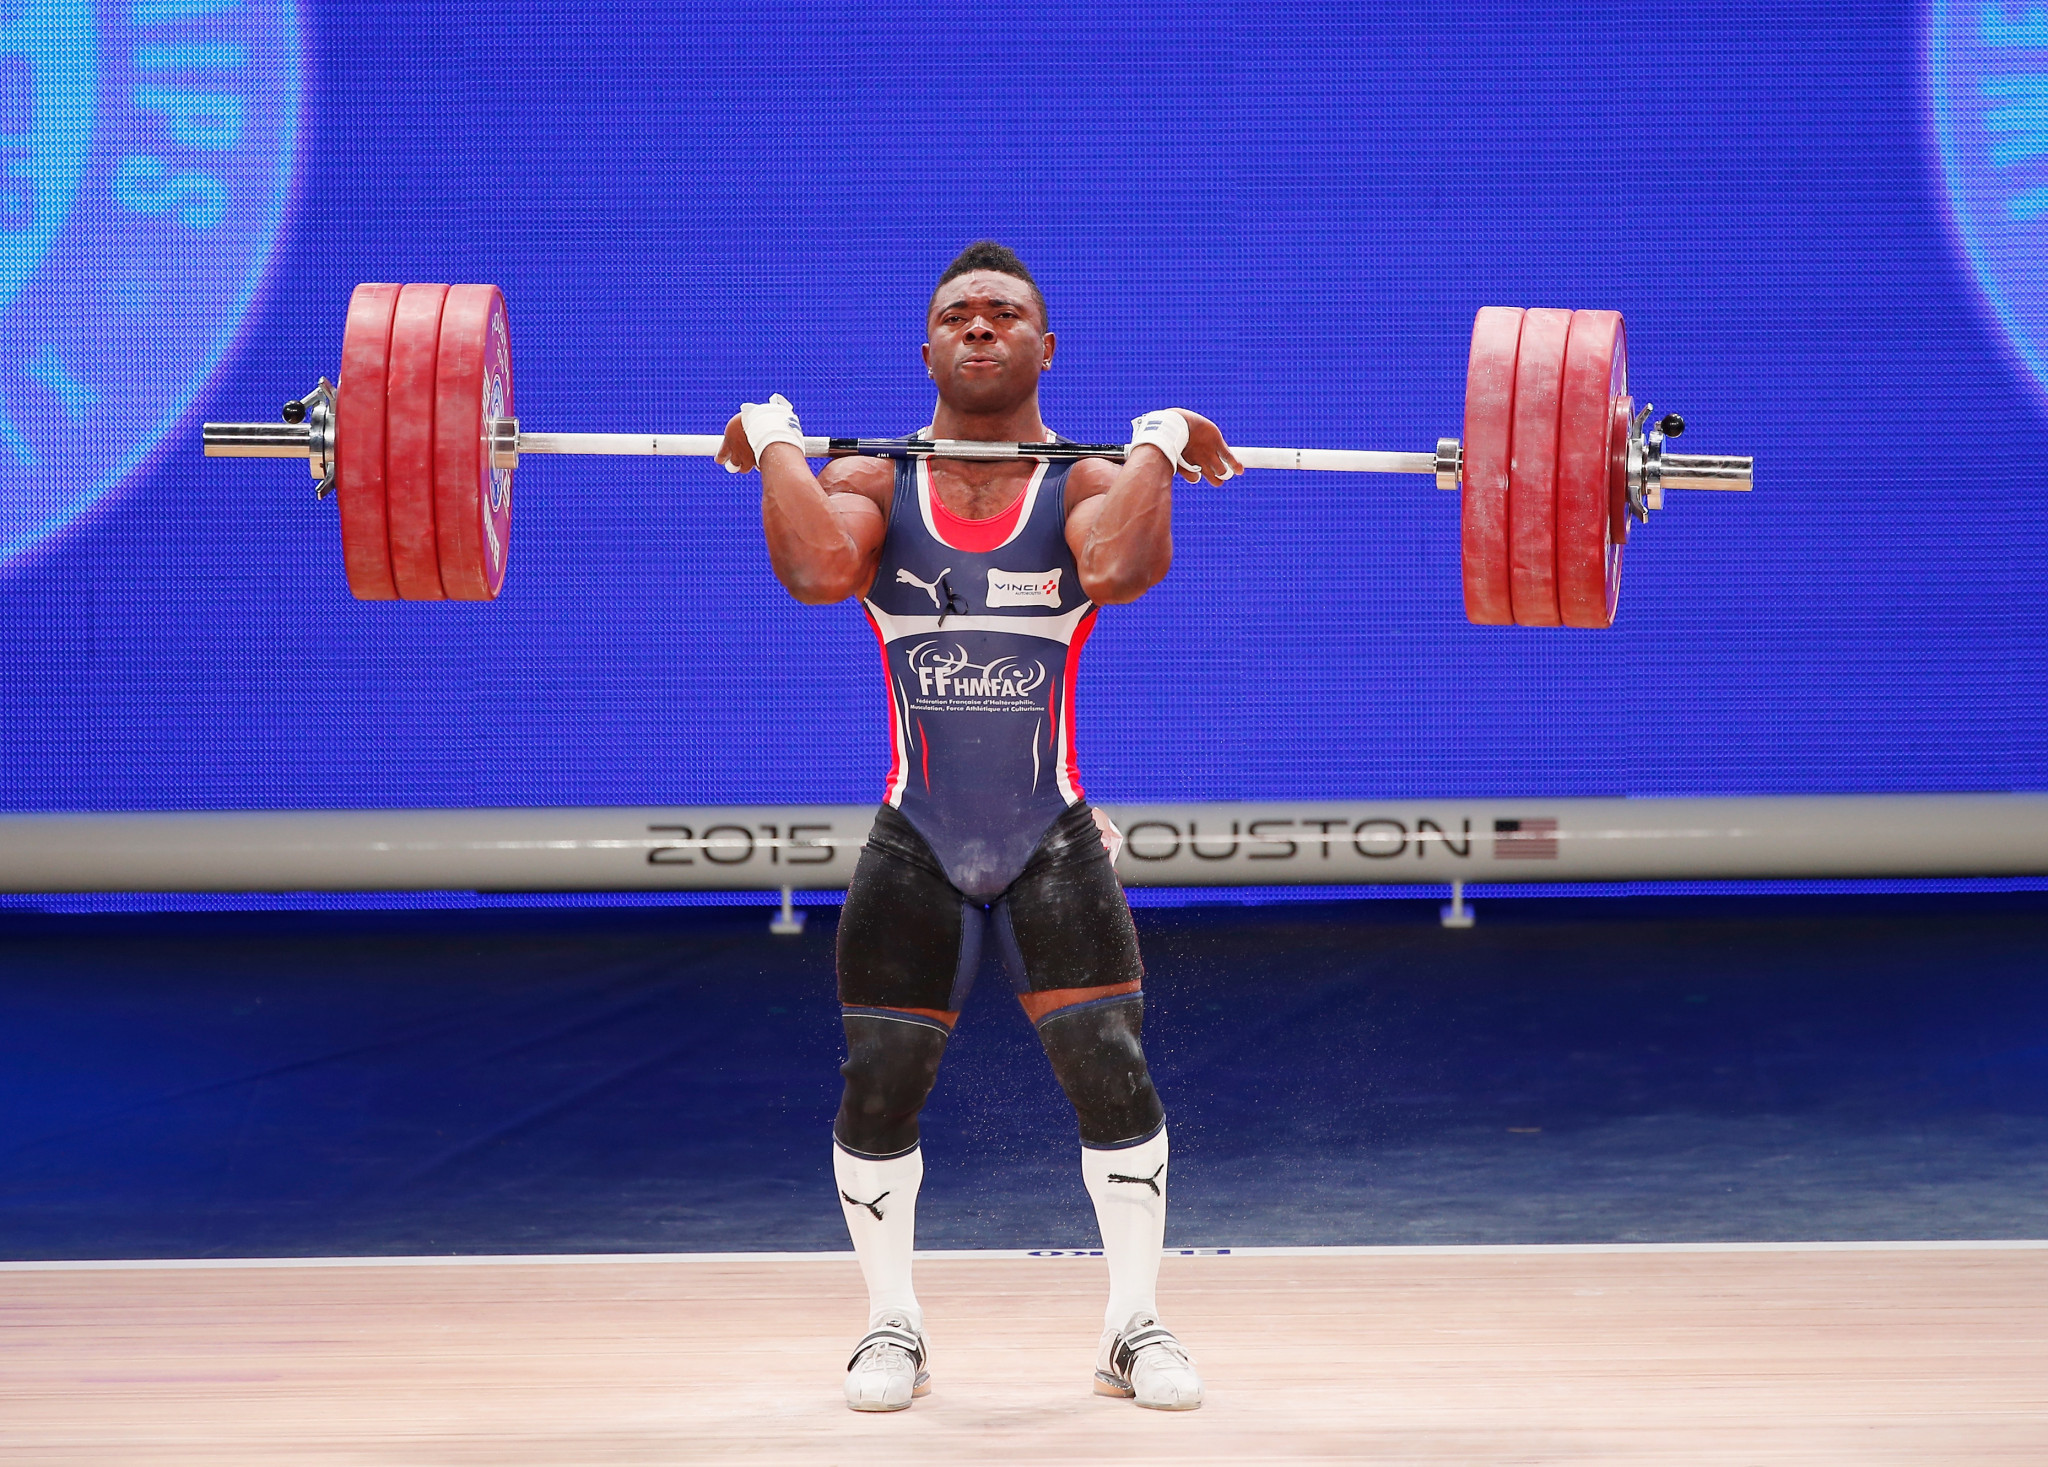 The Clean and Jerk is a two-stage lift ©Getty Images